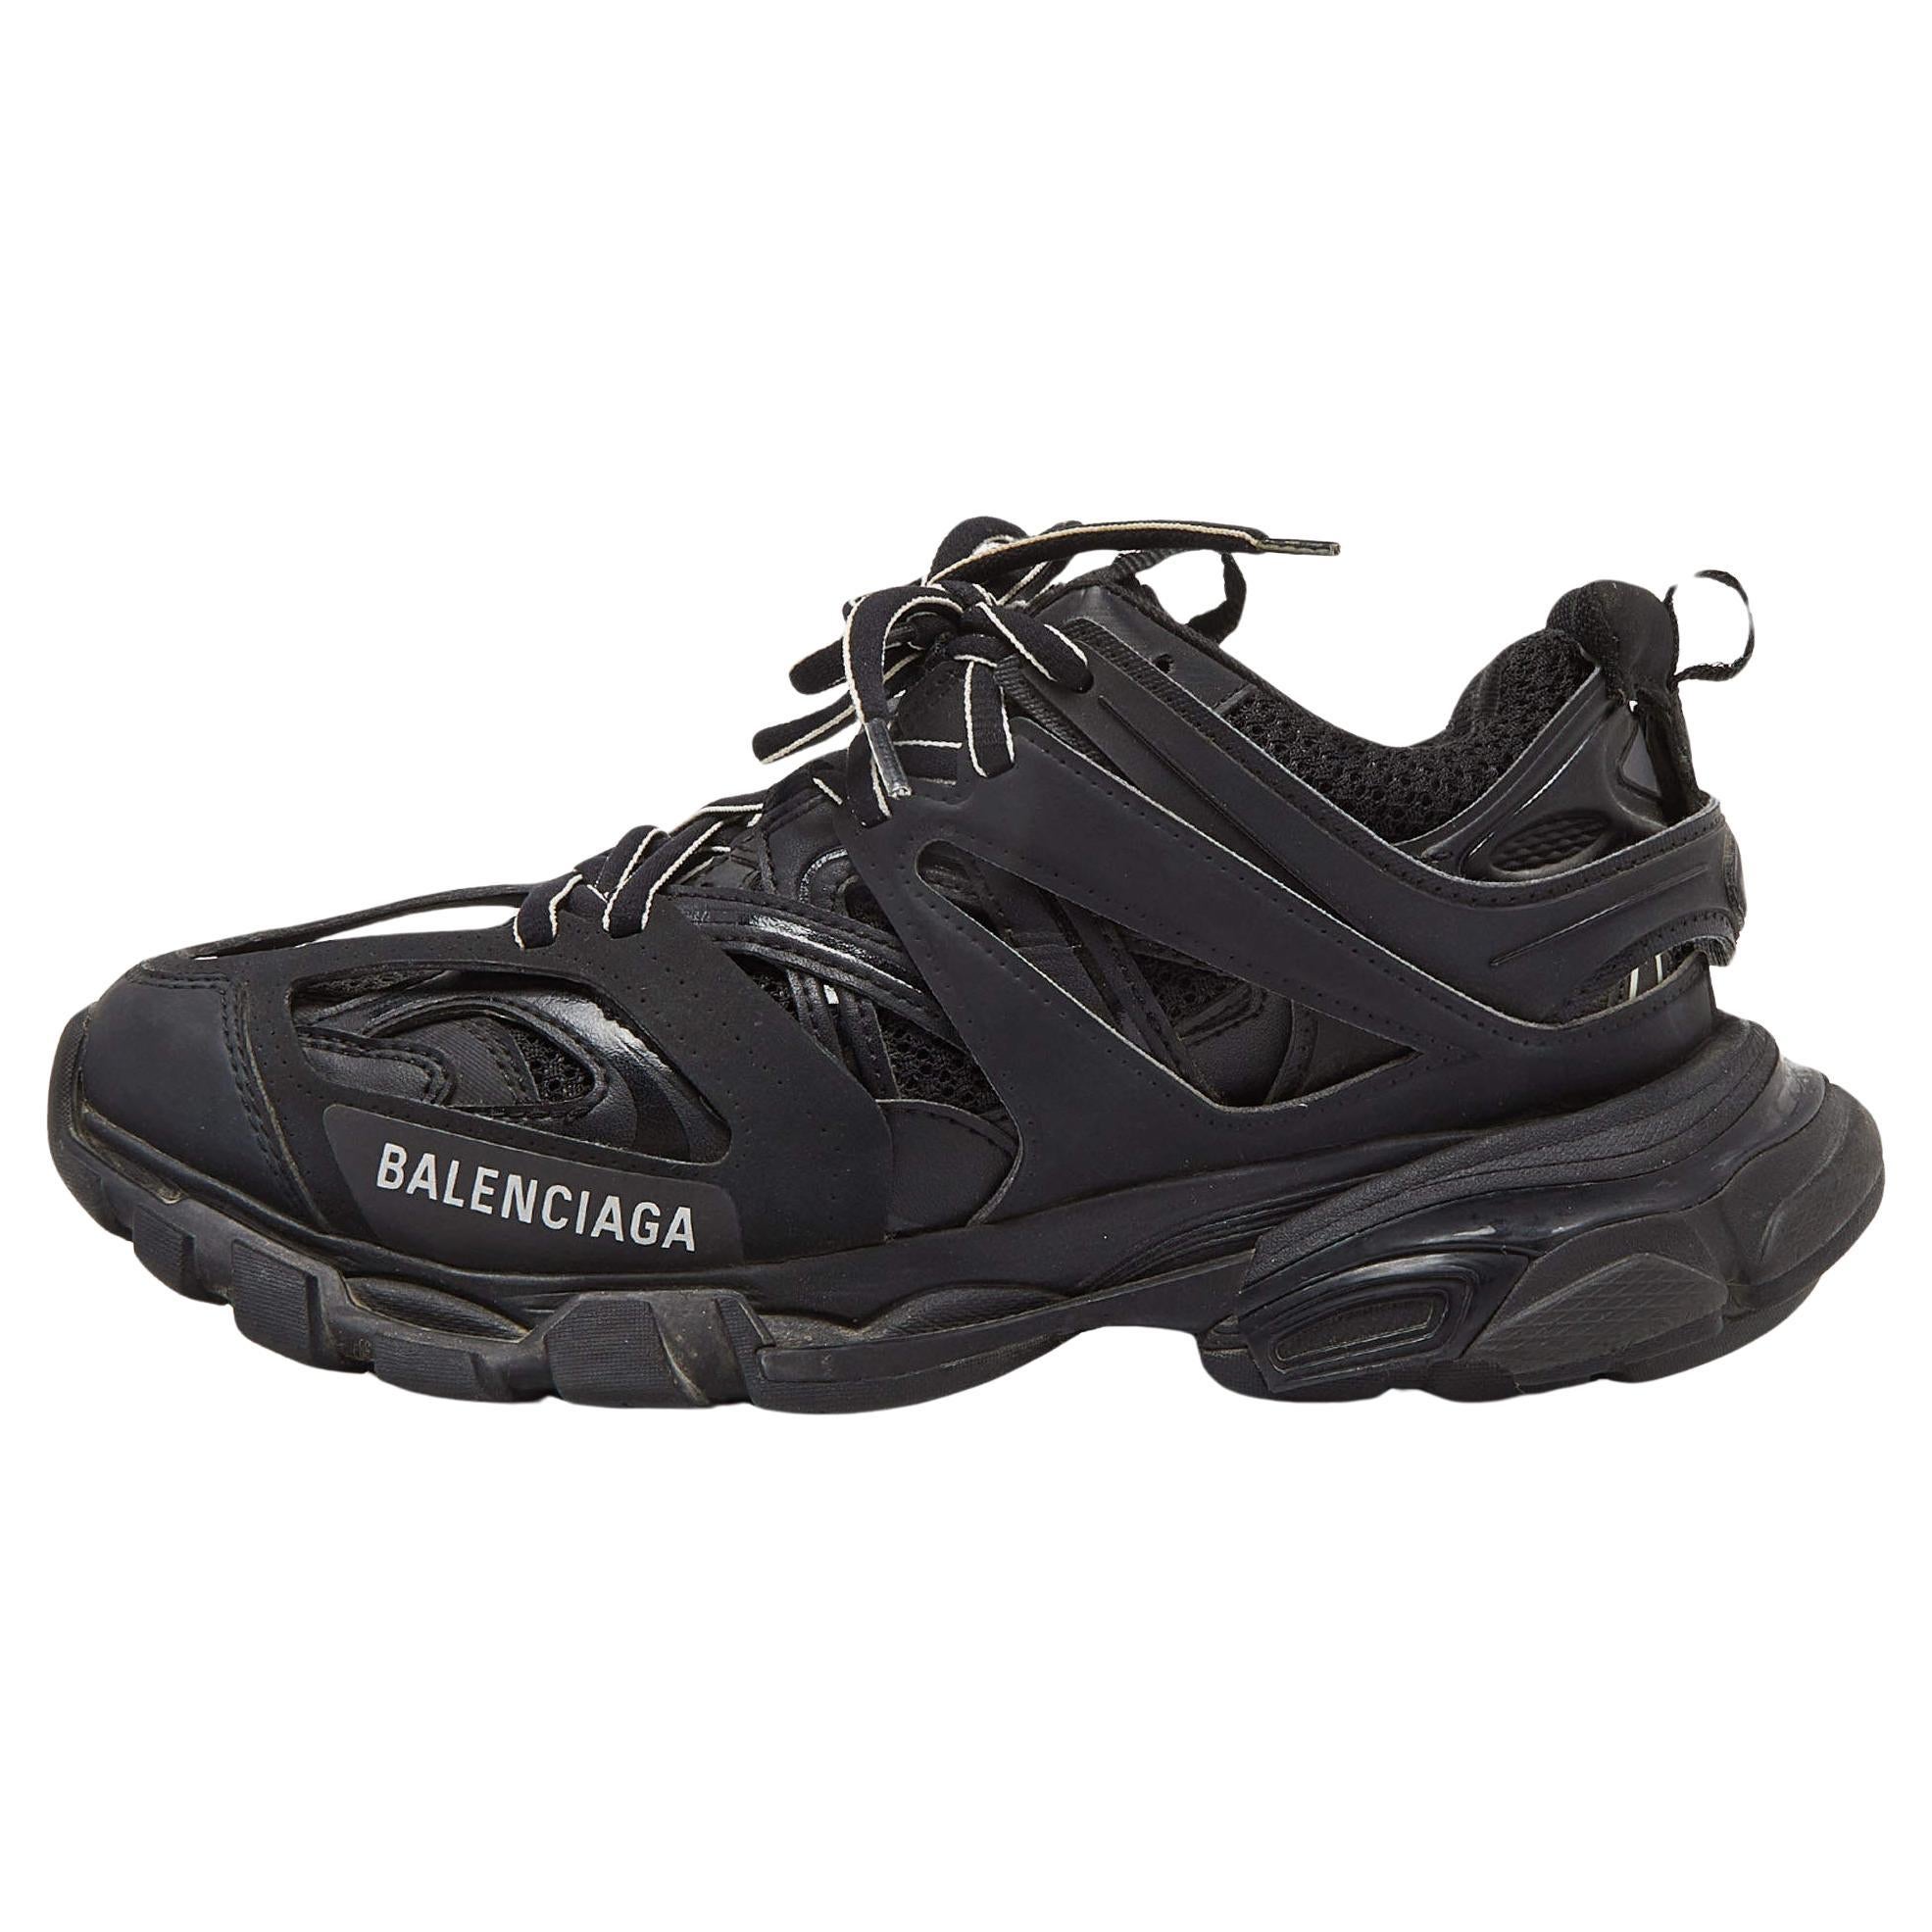 Balenciaga Black Mesh and Faux Leather Track Sneakers Size 38 en vente